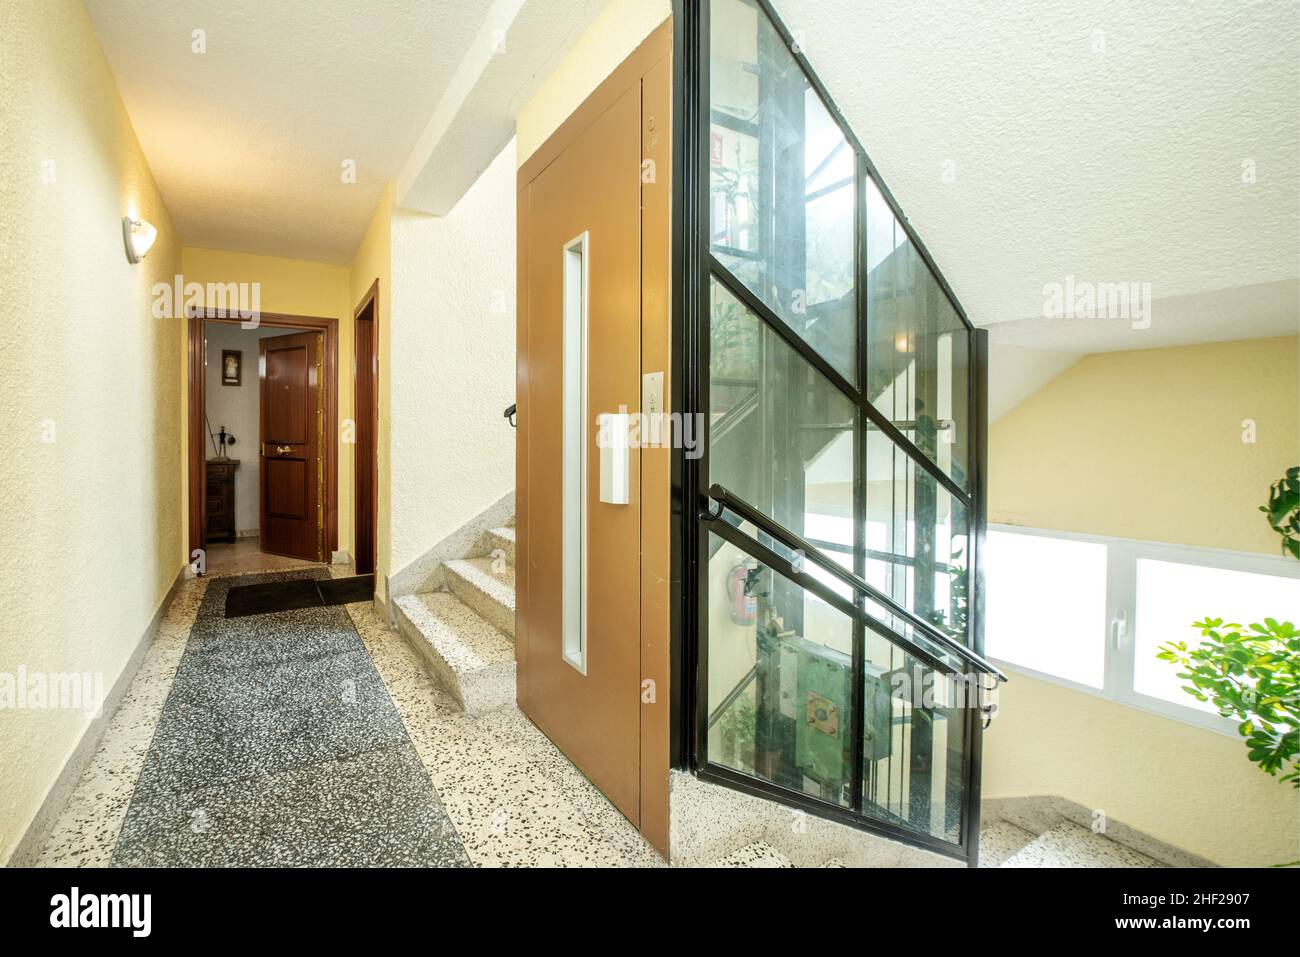 Common areas of a residential building with an elevator shaft covered with glass panels Stock Photo